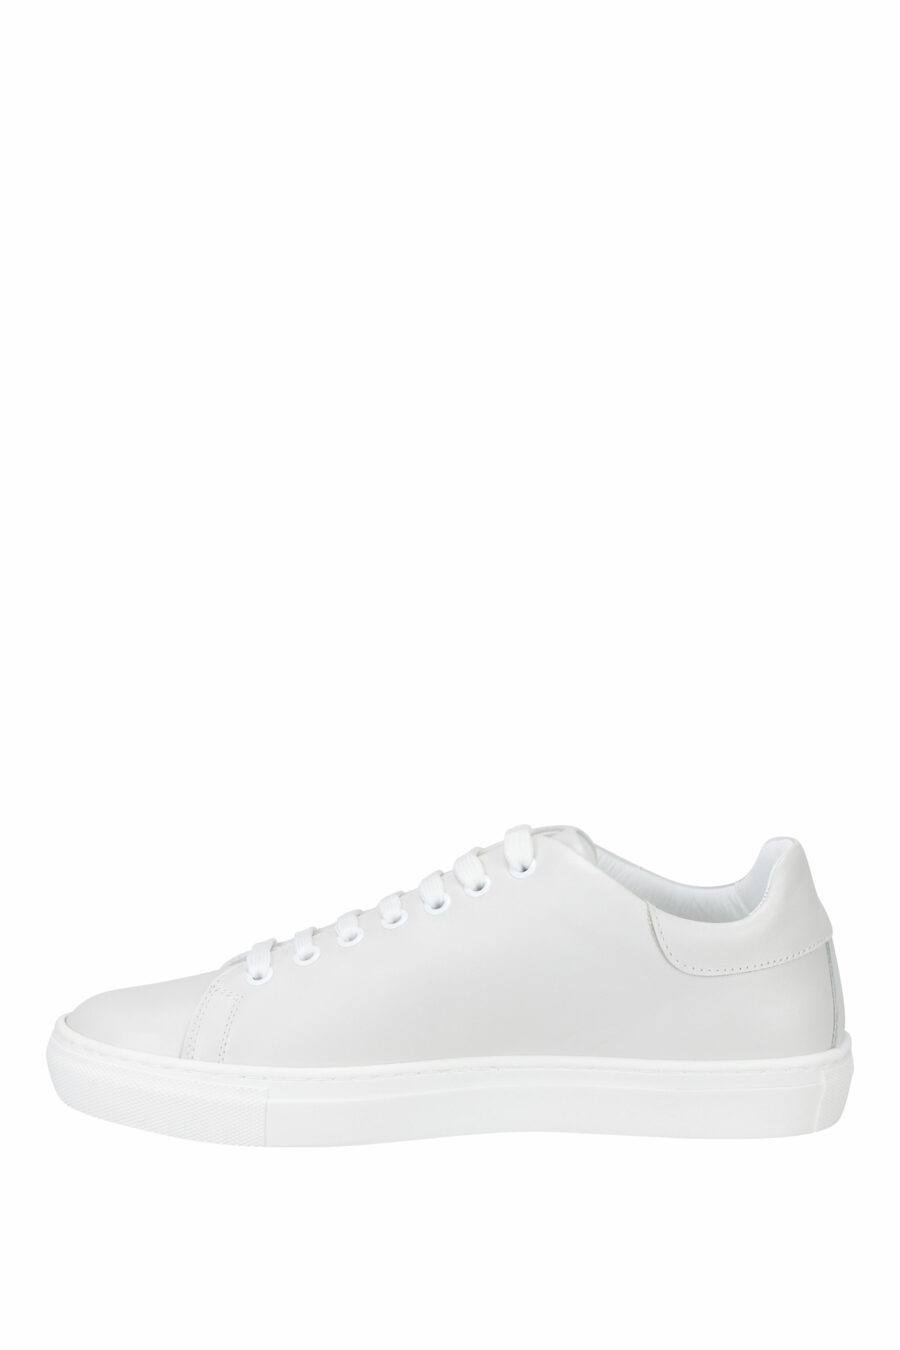 White trainers with black "lettering" logo - 8054653099241 2